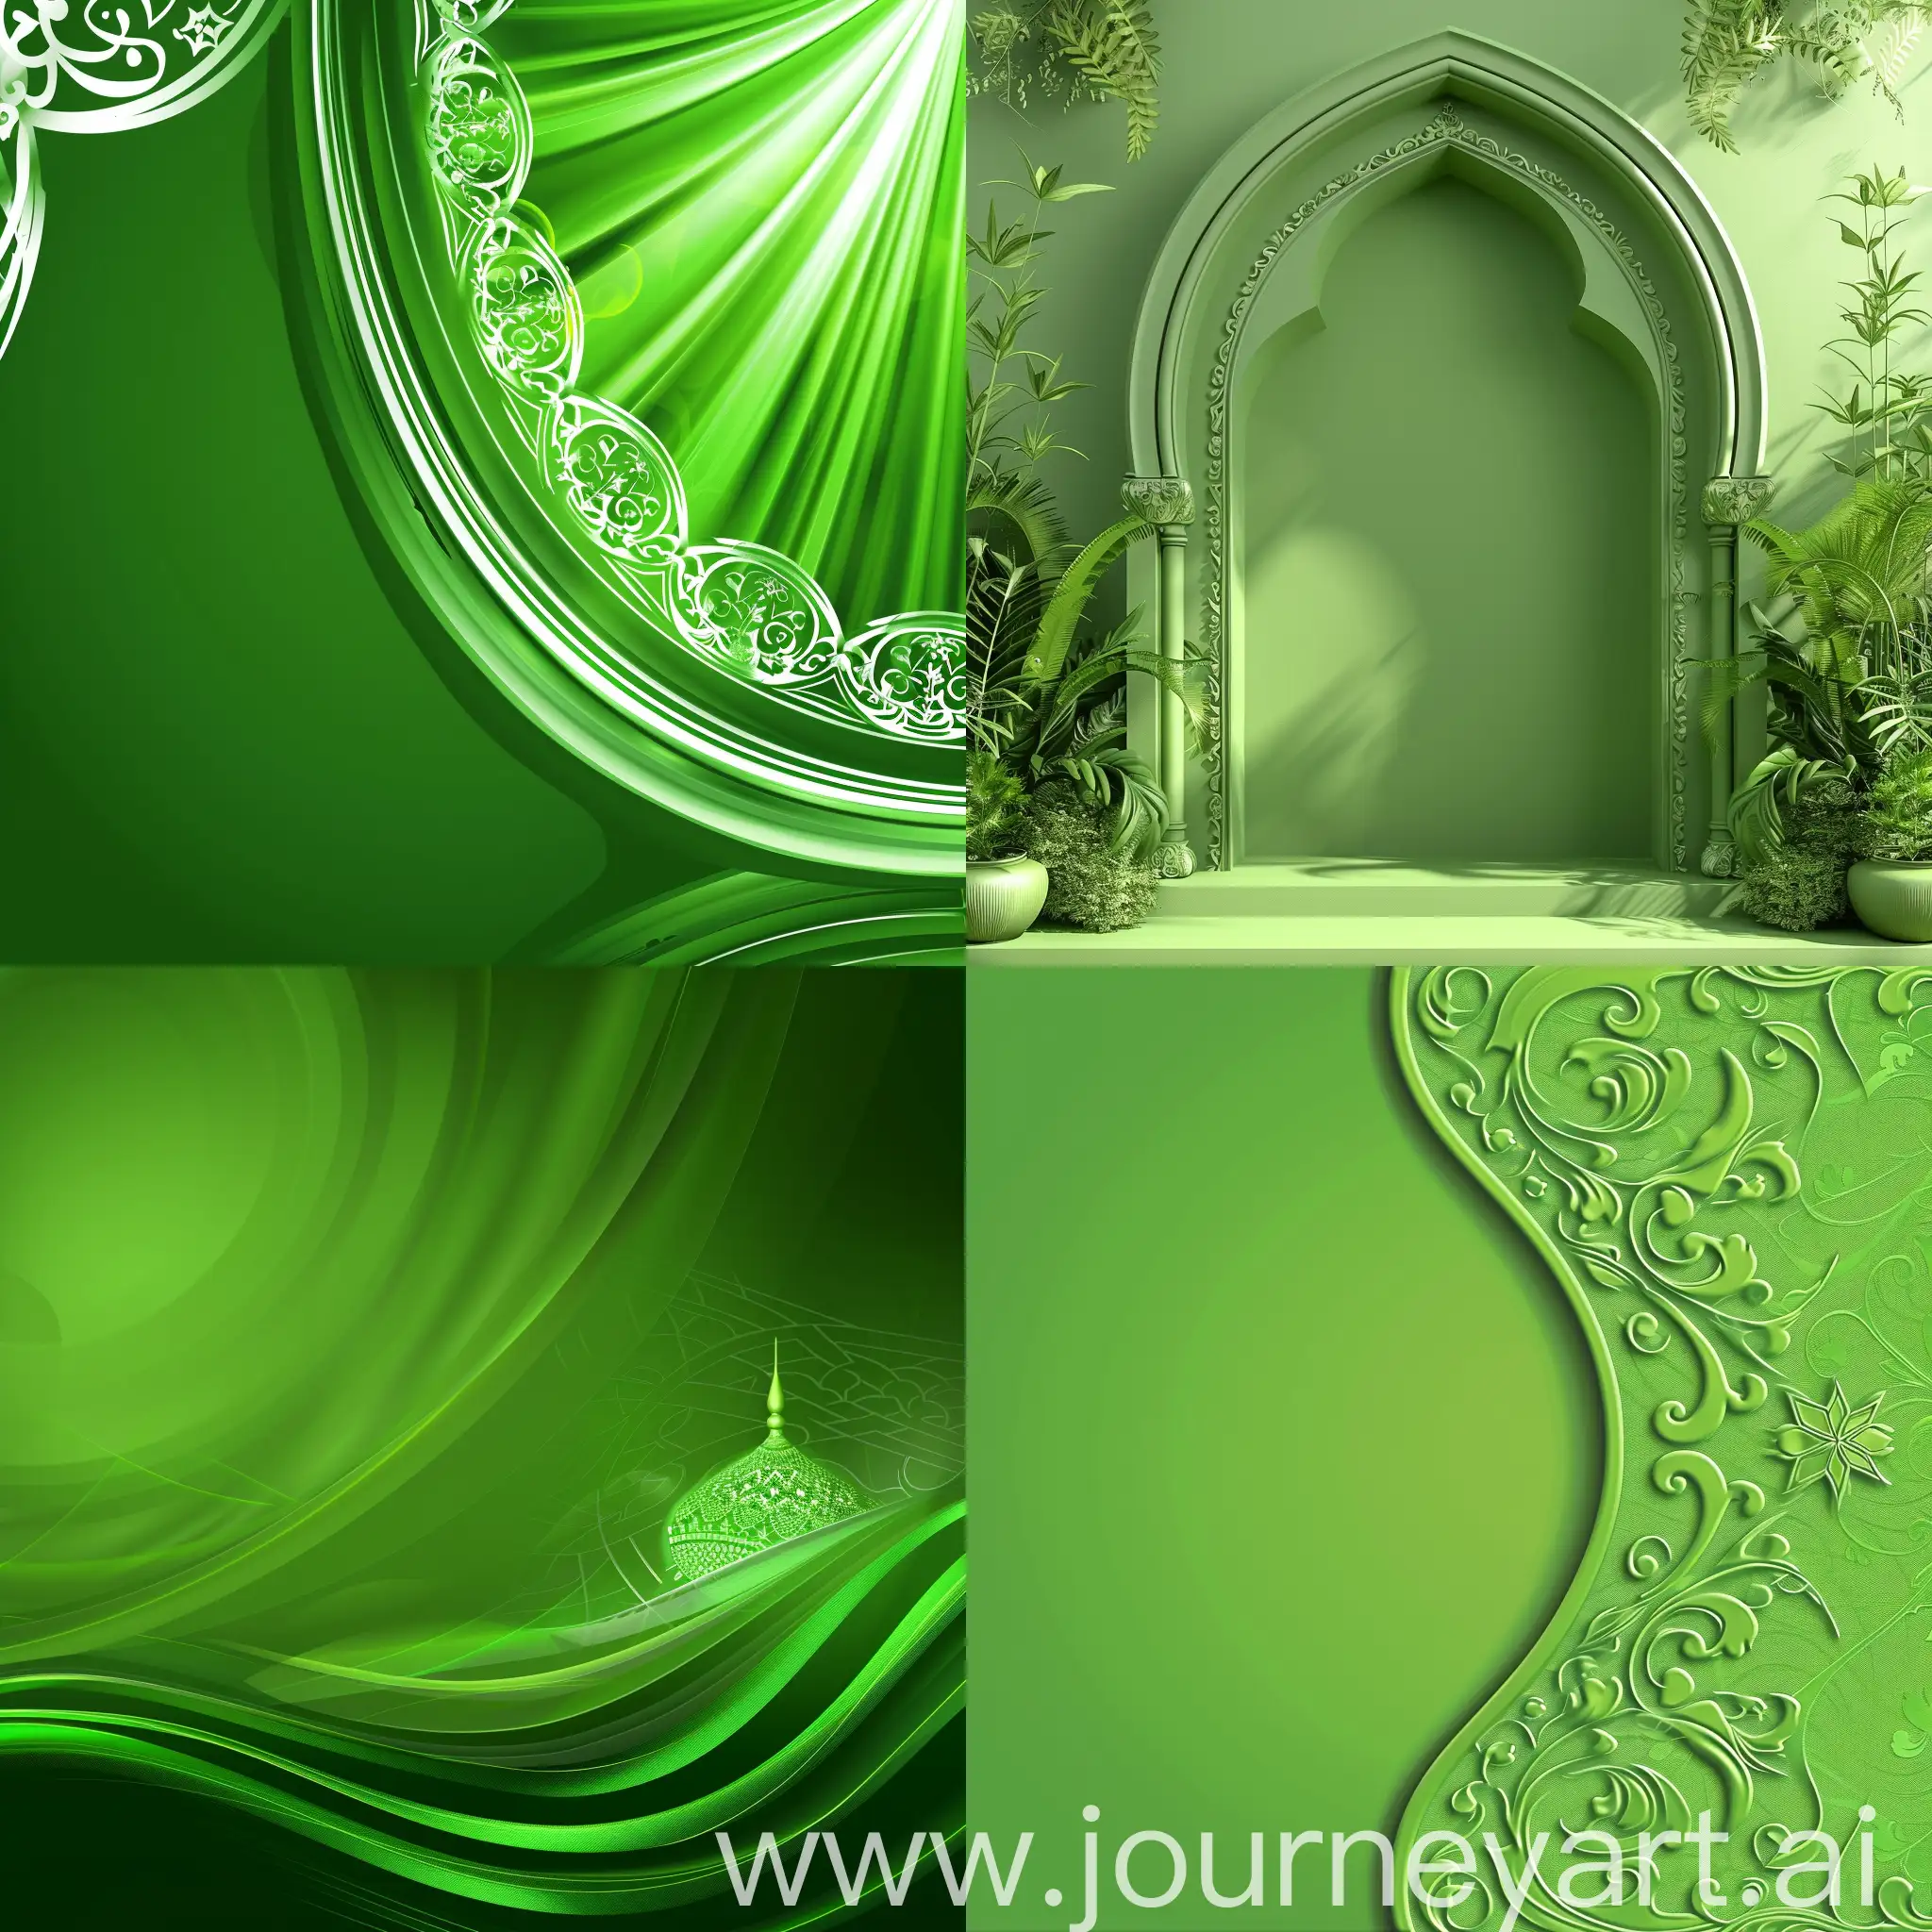 Make A Beautiful Green Modern Background Picture for "Mahmoudism"